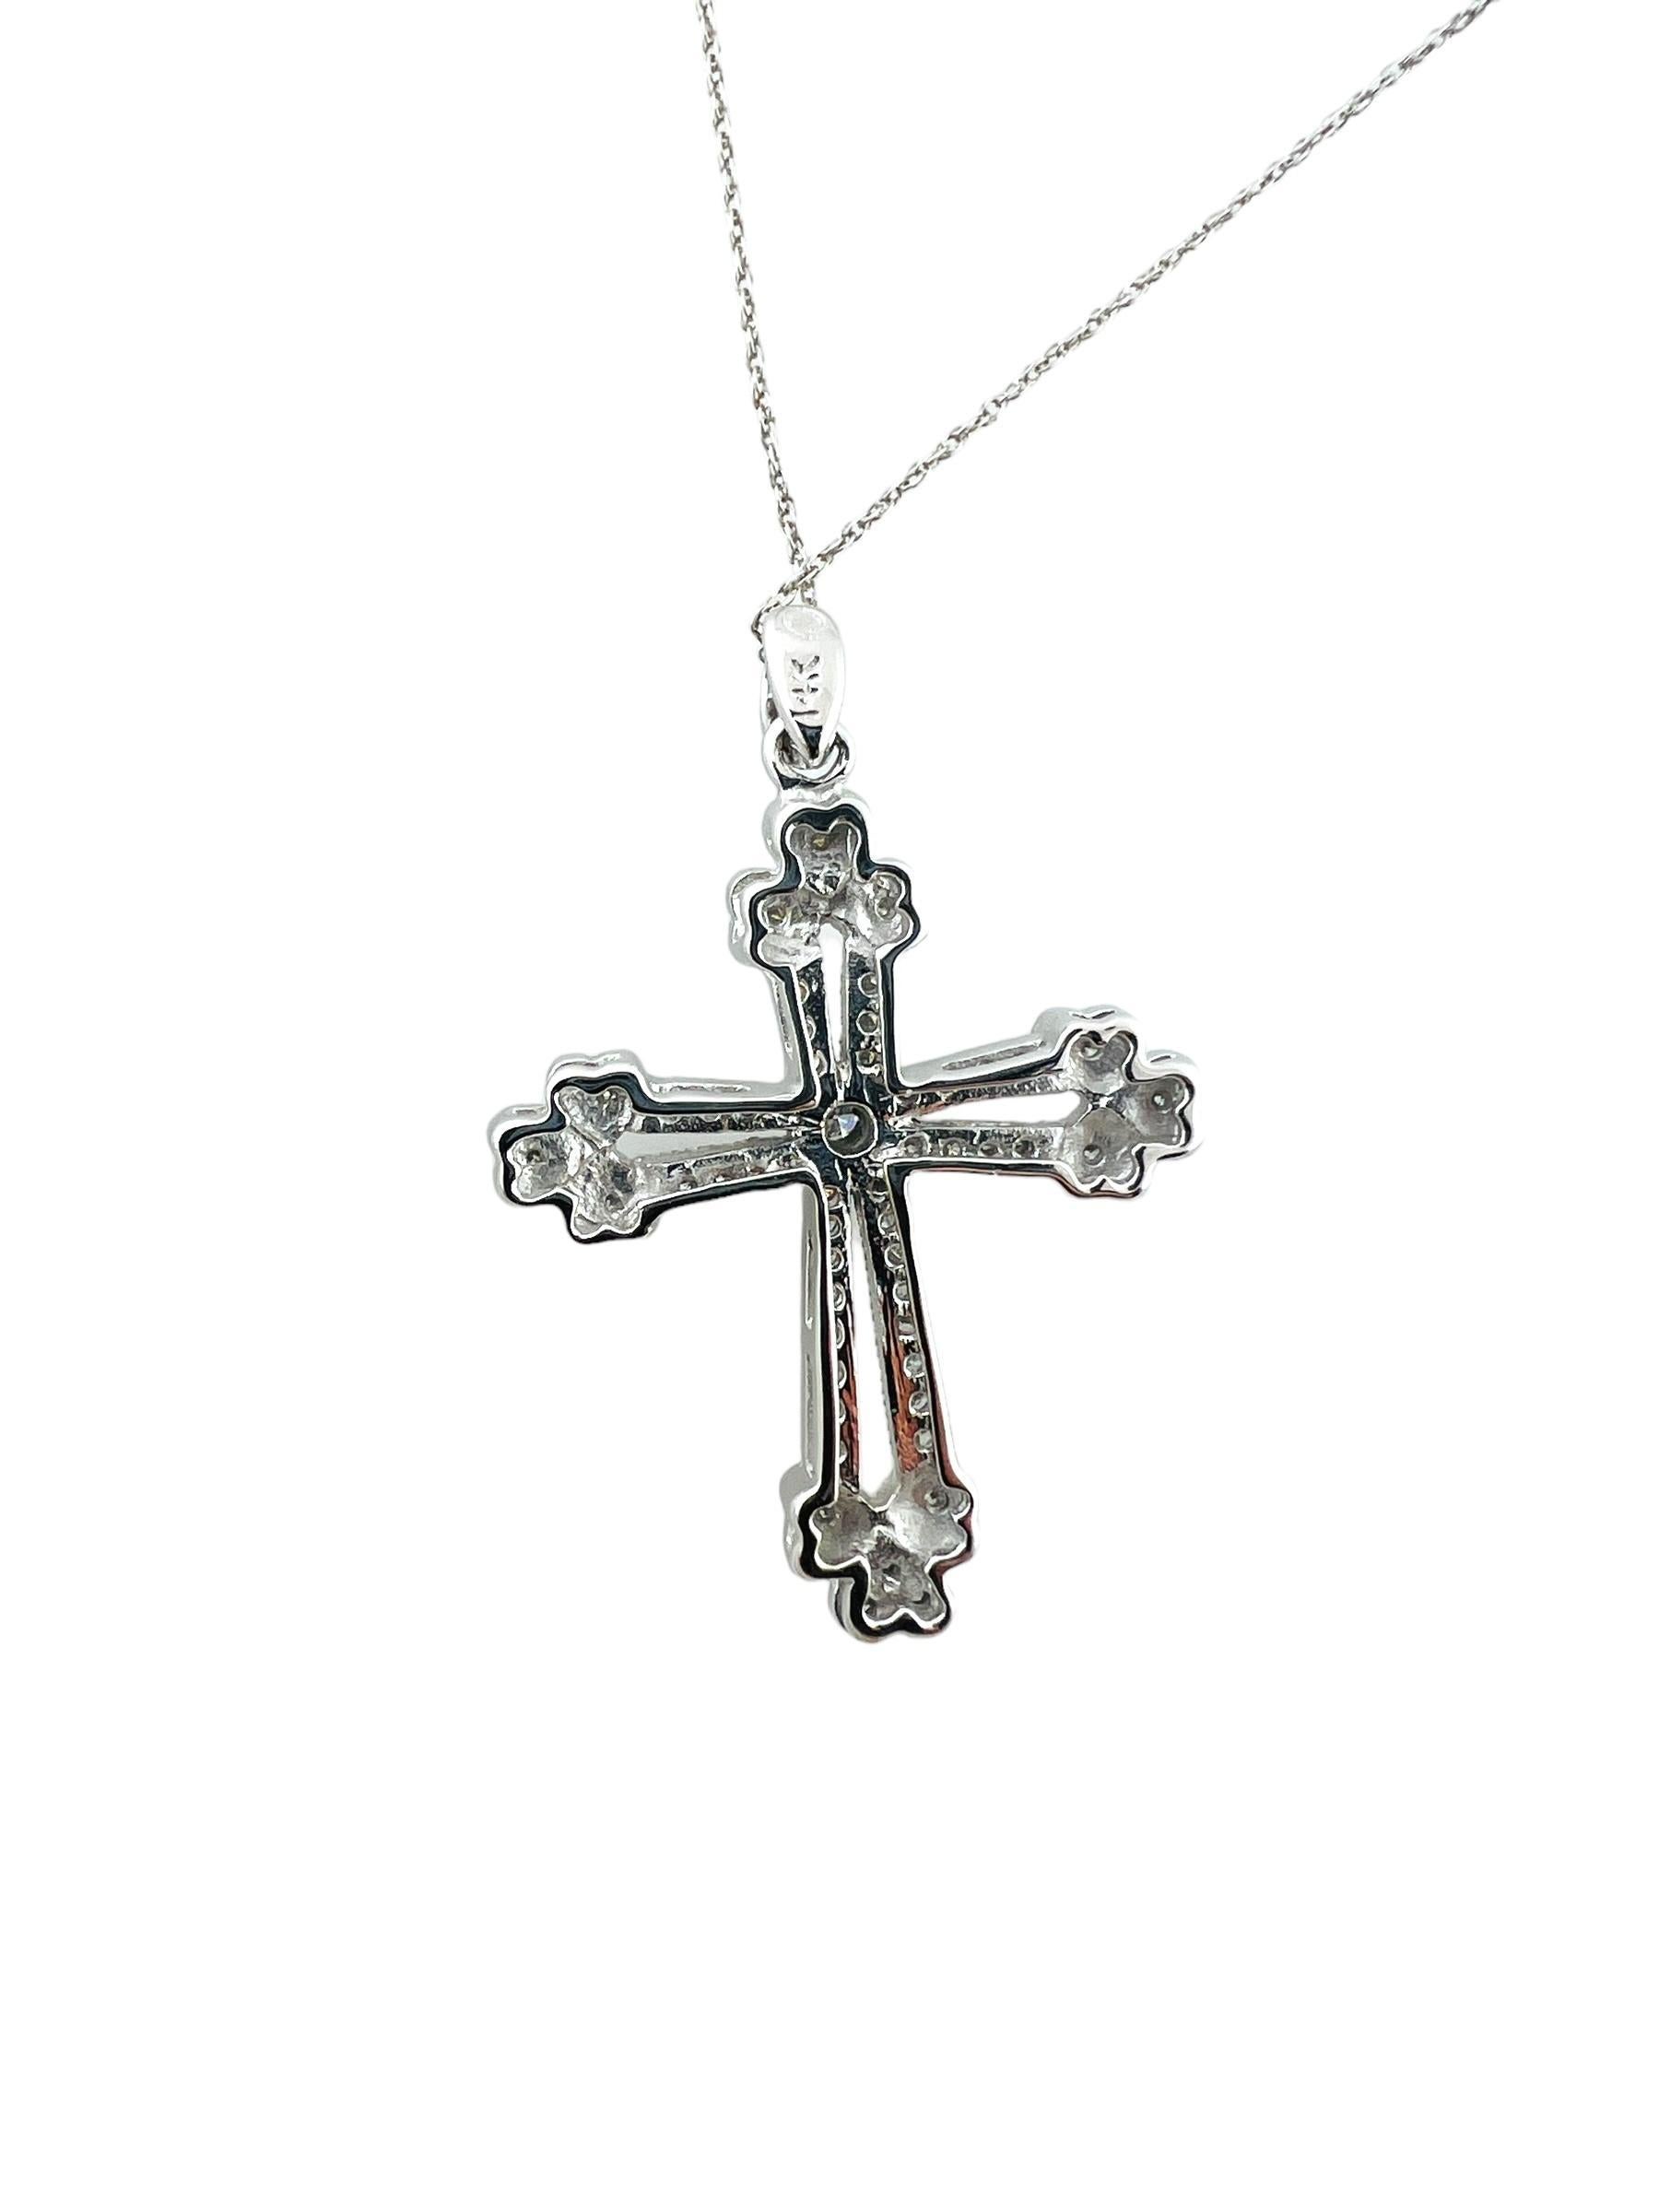 This sparkling cross pendant features 56 round brilliant cut diamonds set in beautifully detailed 14K white gold. Suspends from a classic cable necklace.

Approximate diamond weight: .30 ct.

Diamond color: G

Diamond clarity: SI1-VS2

Stamped: